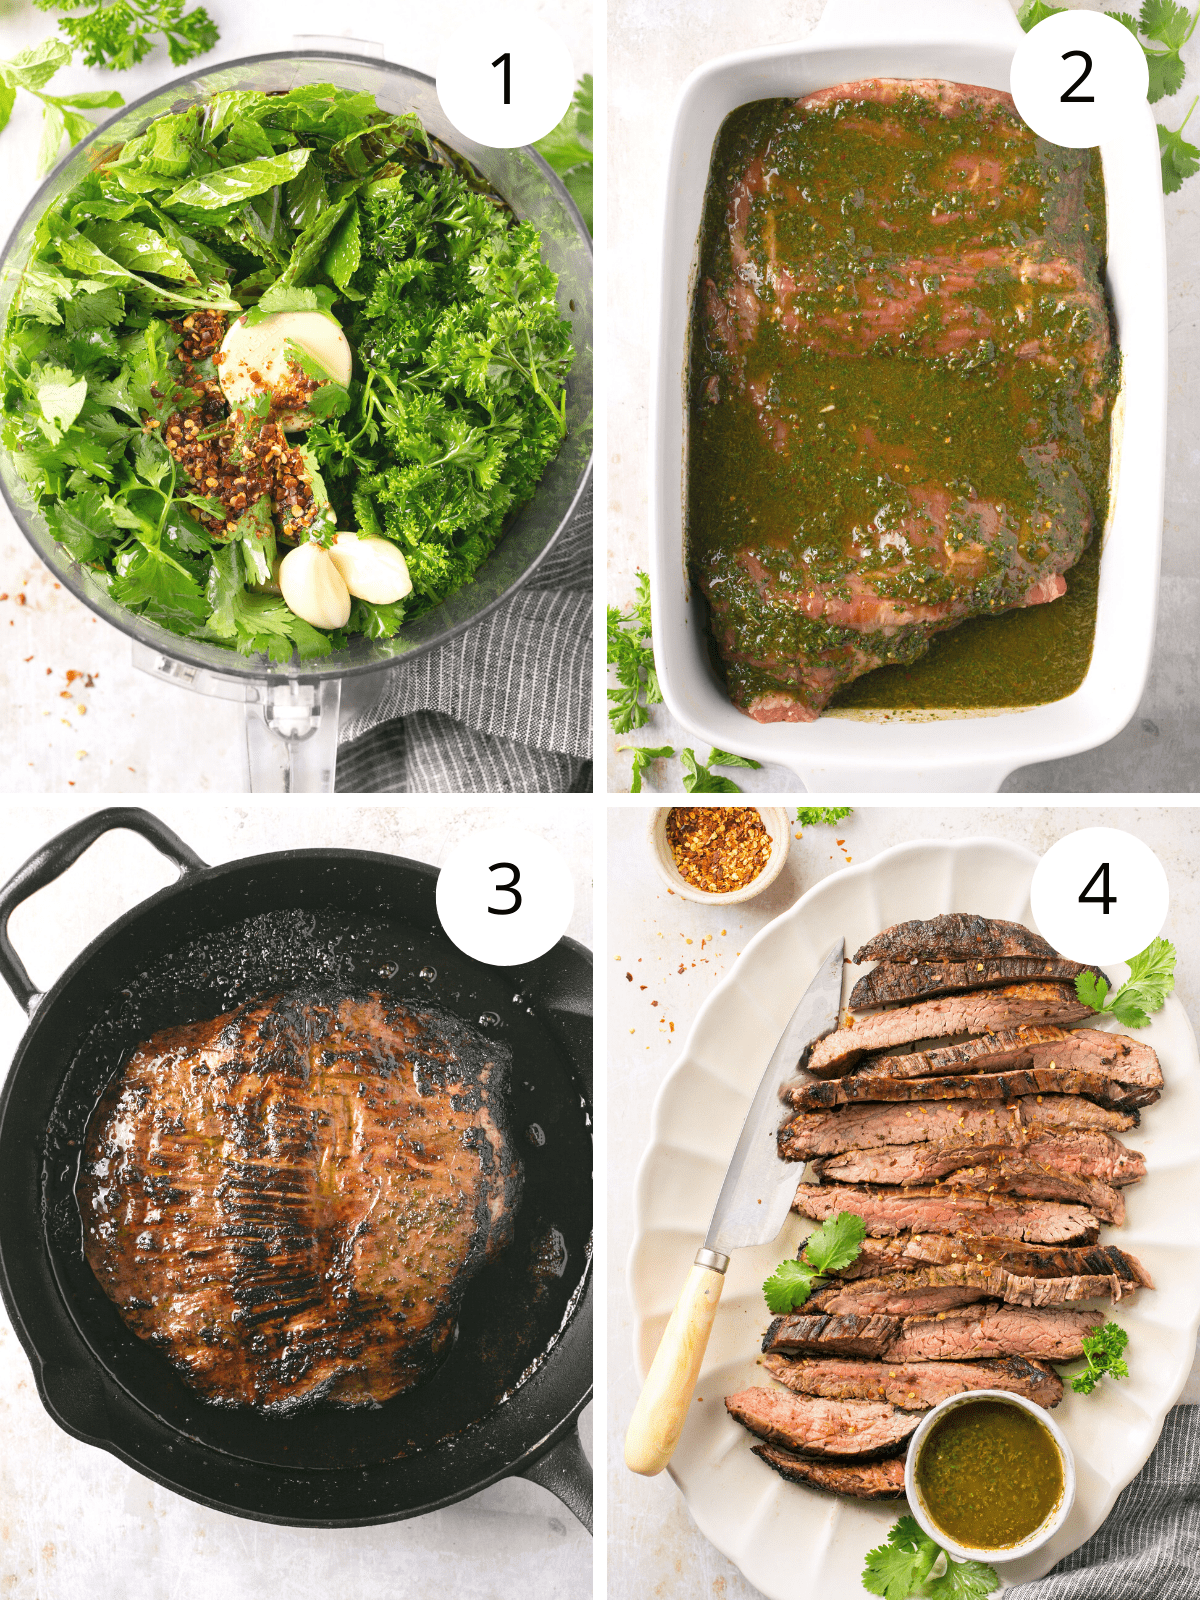 Step by step directions for cooking bavette steak in a cast iron pan.